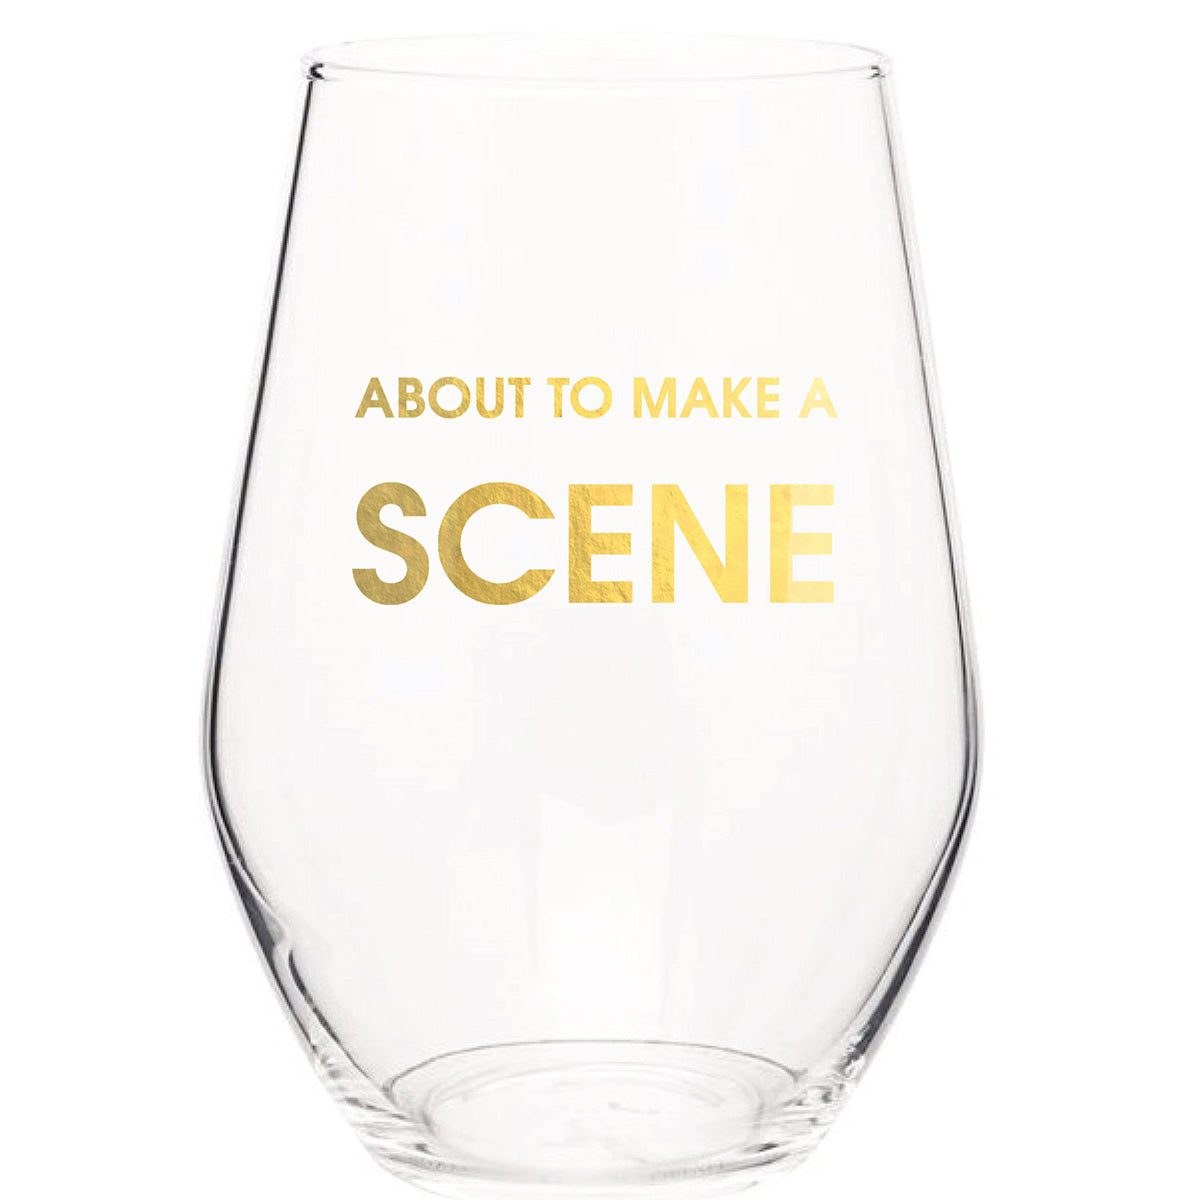 About To Make A Scene - Gold Foil Stemless Wine Glass